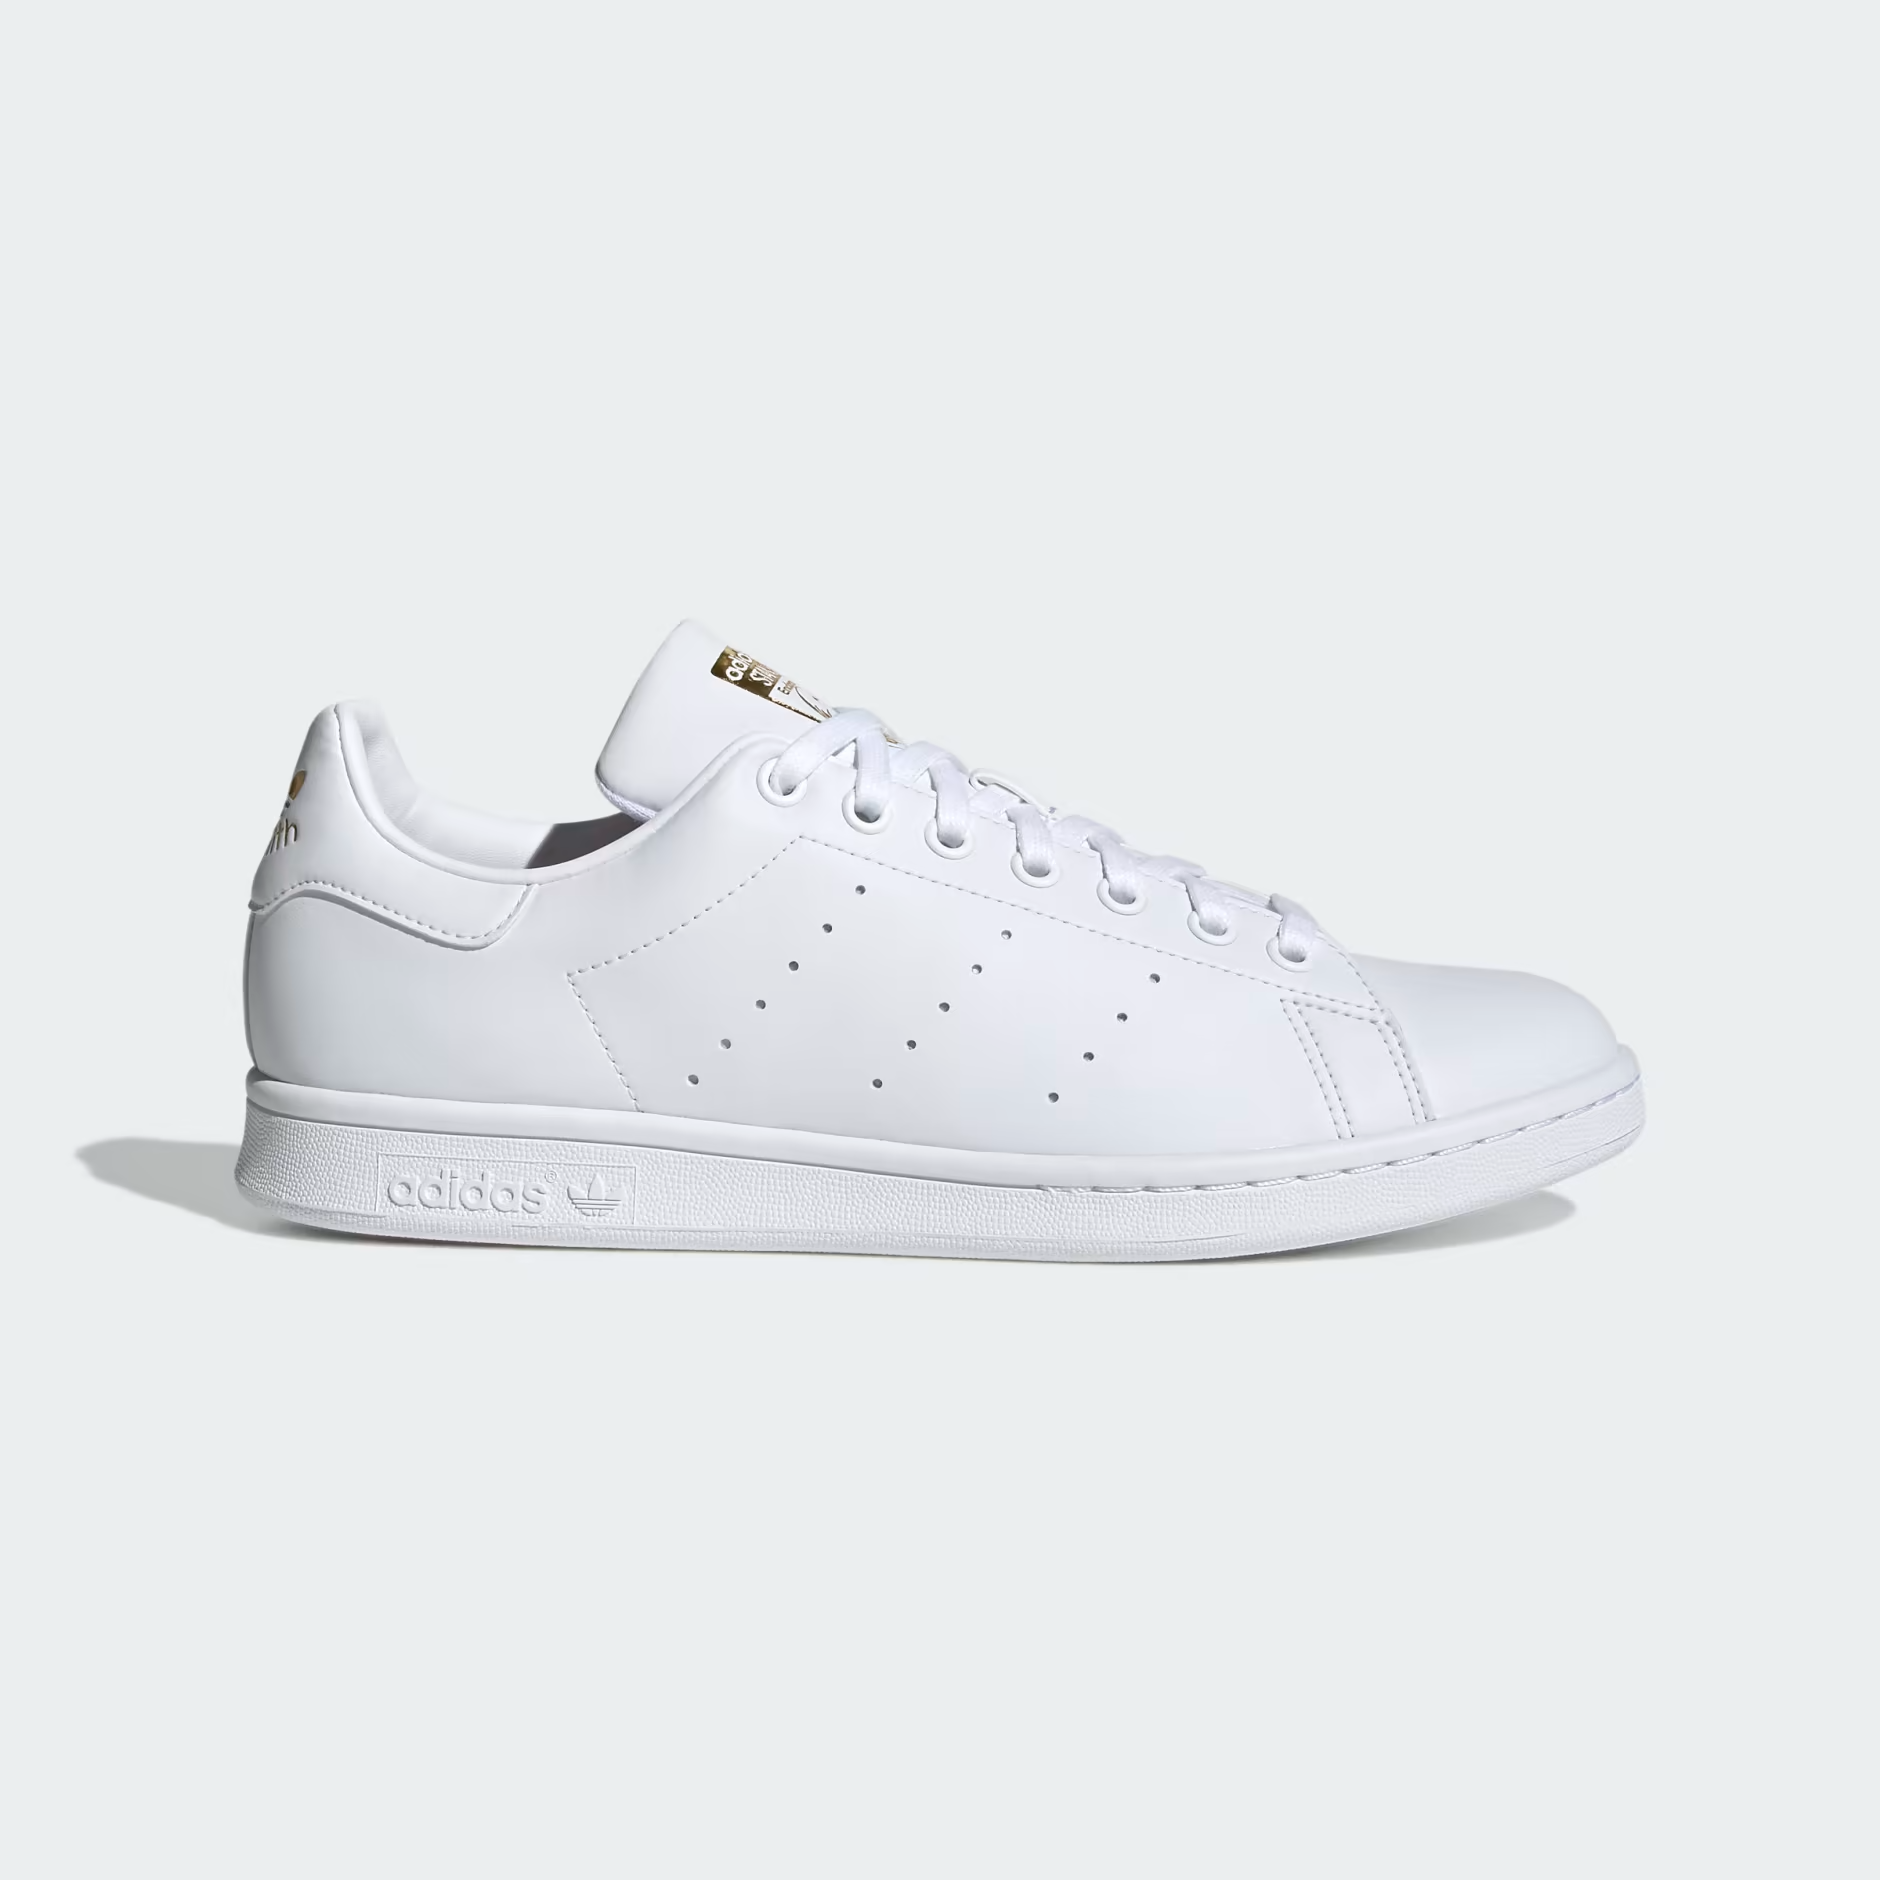 Best white office sneakers for women | White Adidas Stan Smith shoes